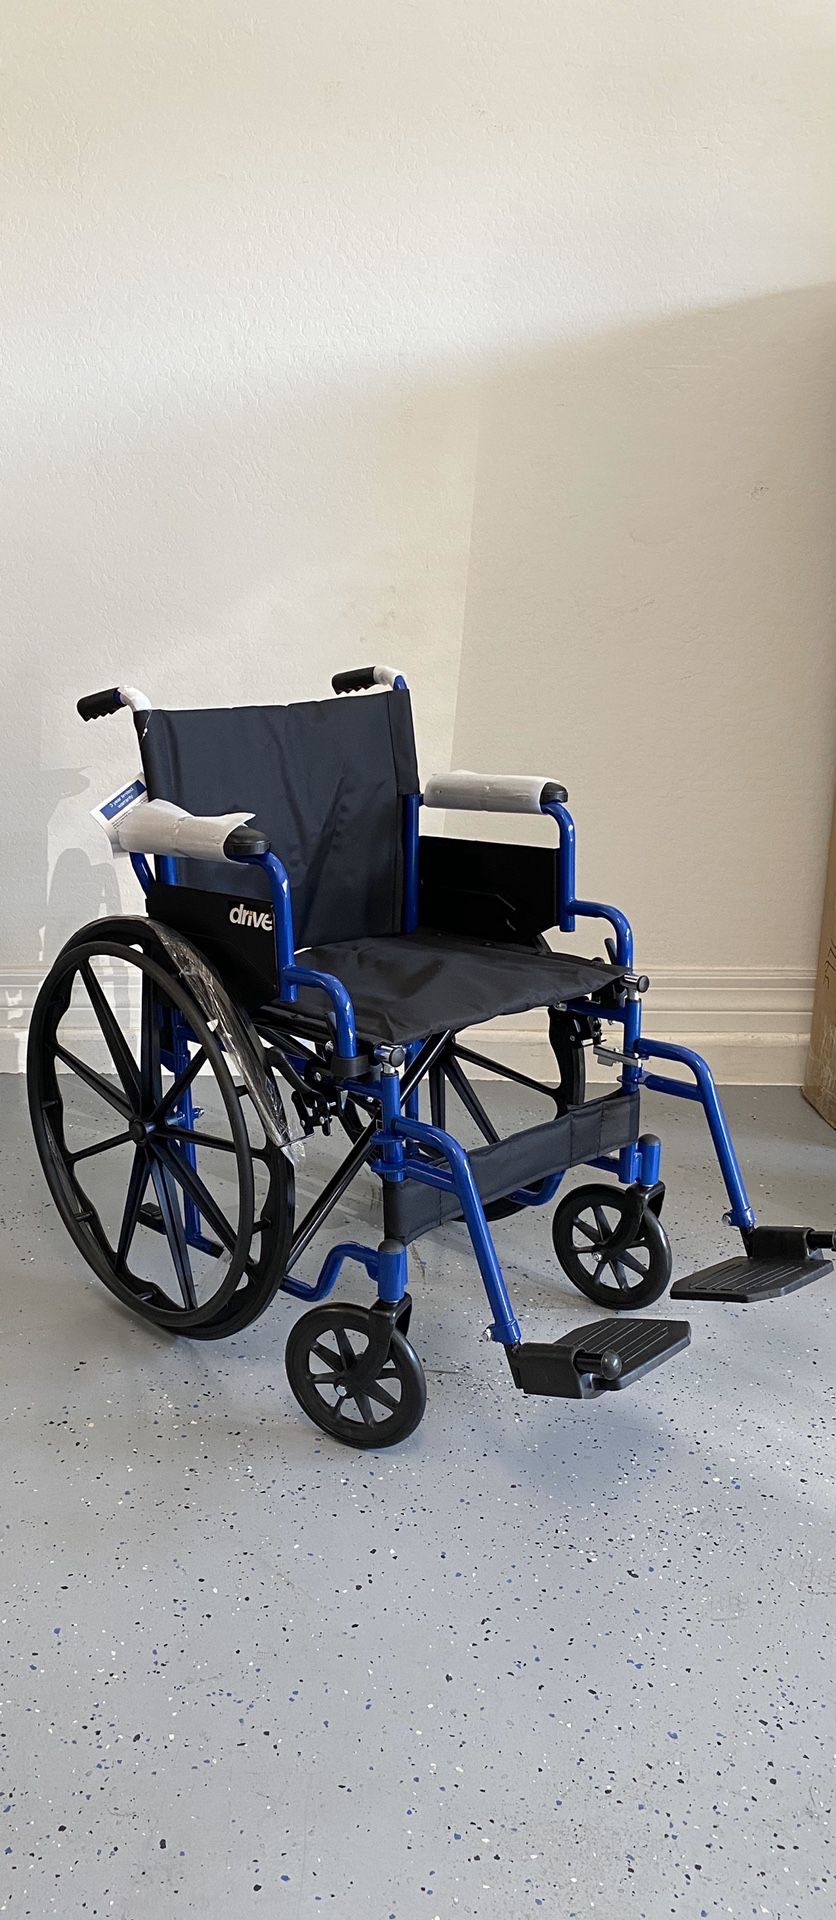 Drive Medical Wheelchair 20 inch wide- BRAND NEW